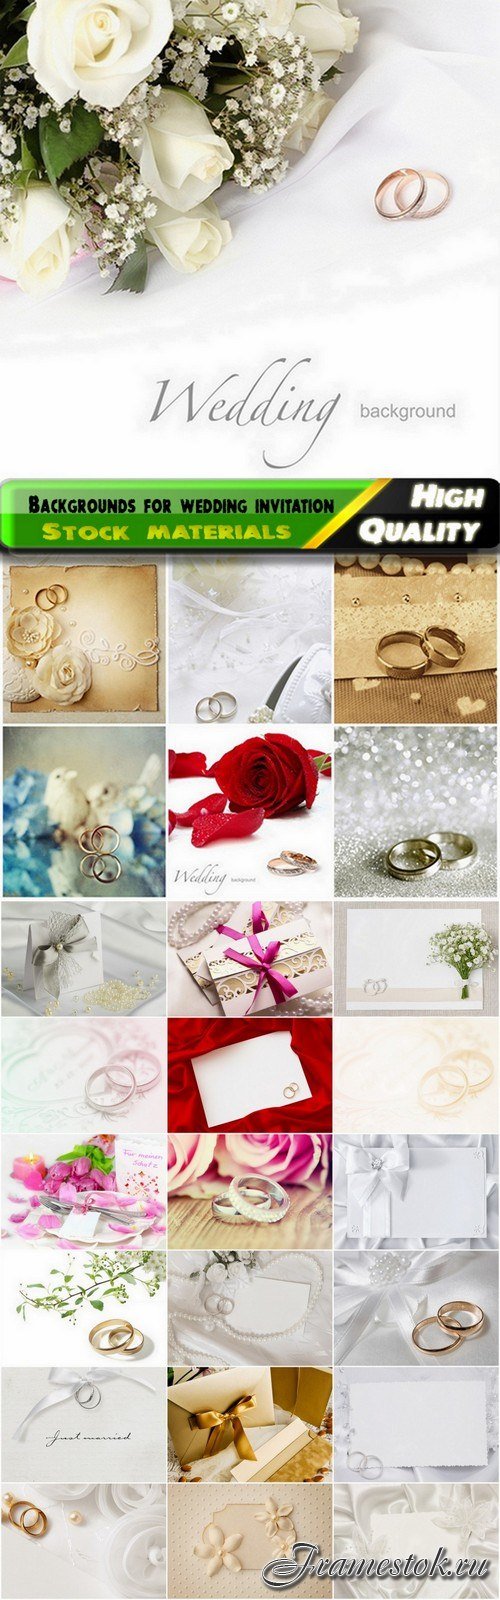 Cute backgrounds for wedding invitation cards - 25 HQ Jpg